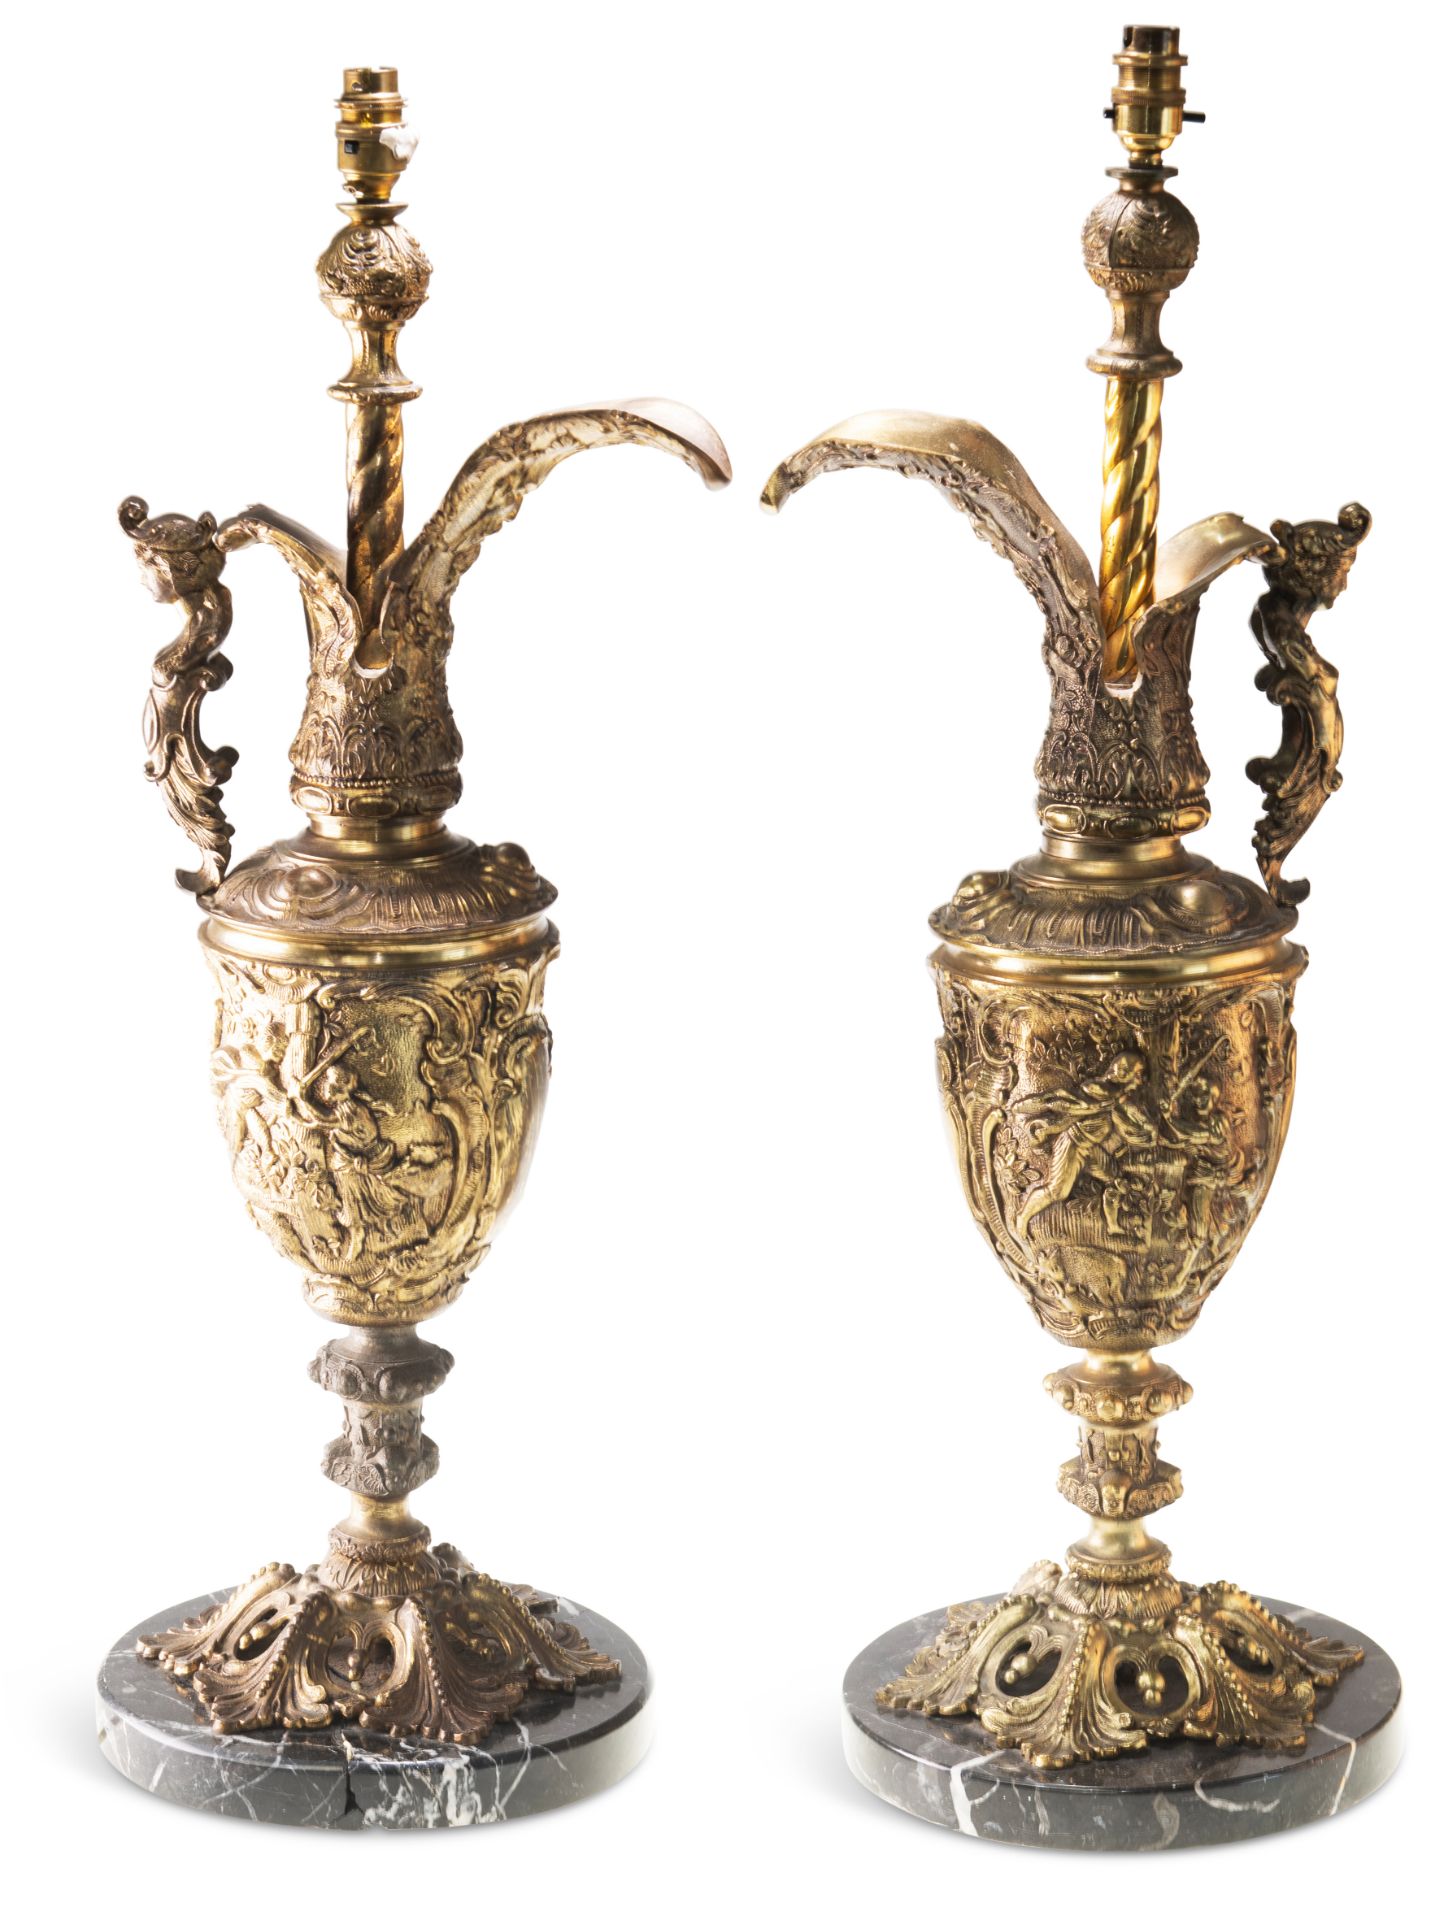 A PAIR OF RENAISSANCE REVIVAL LARGE BRASS EWER LAMPS, 19TH CENTURY, each cast with figures and